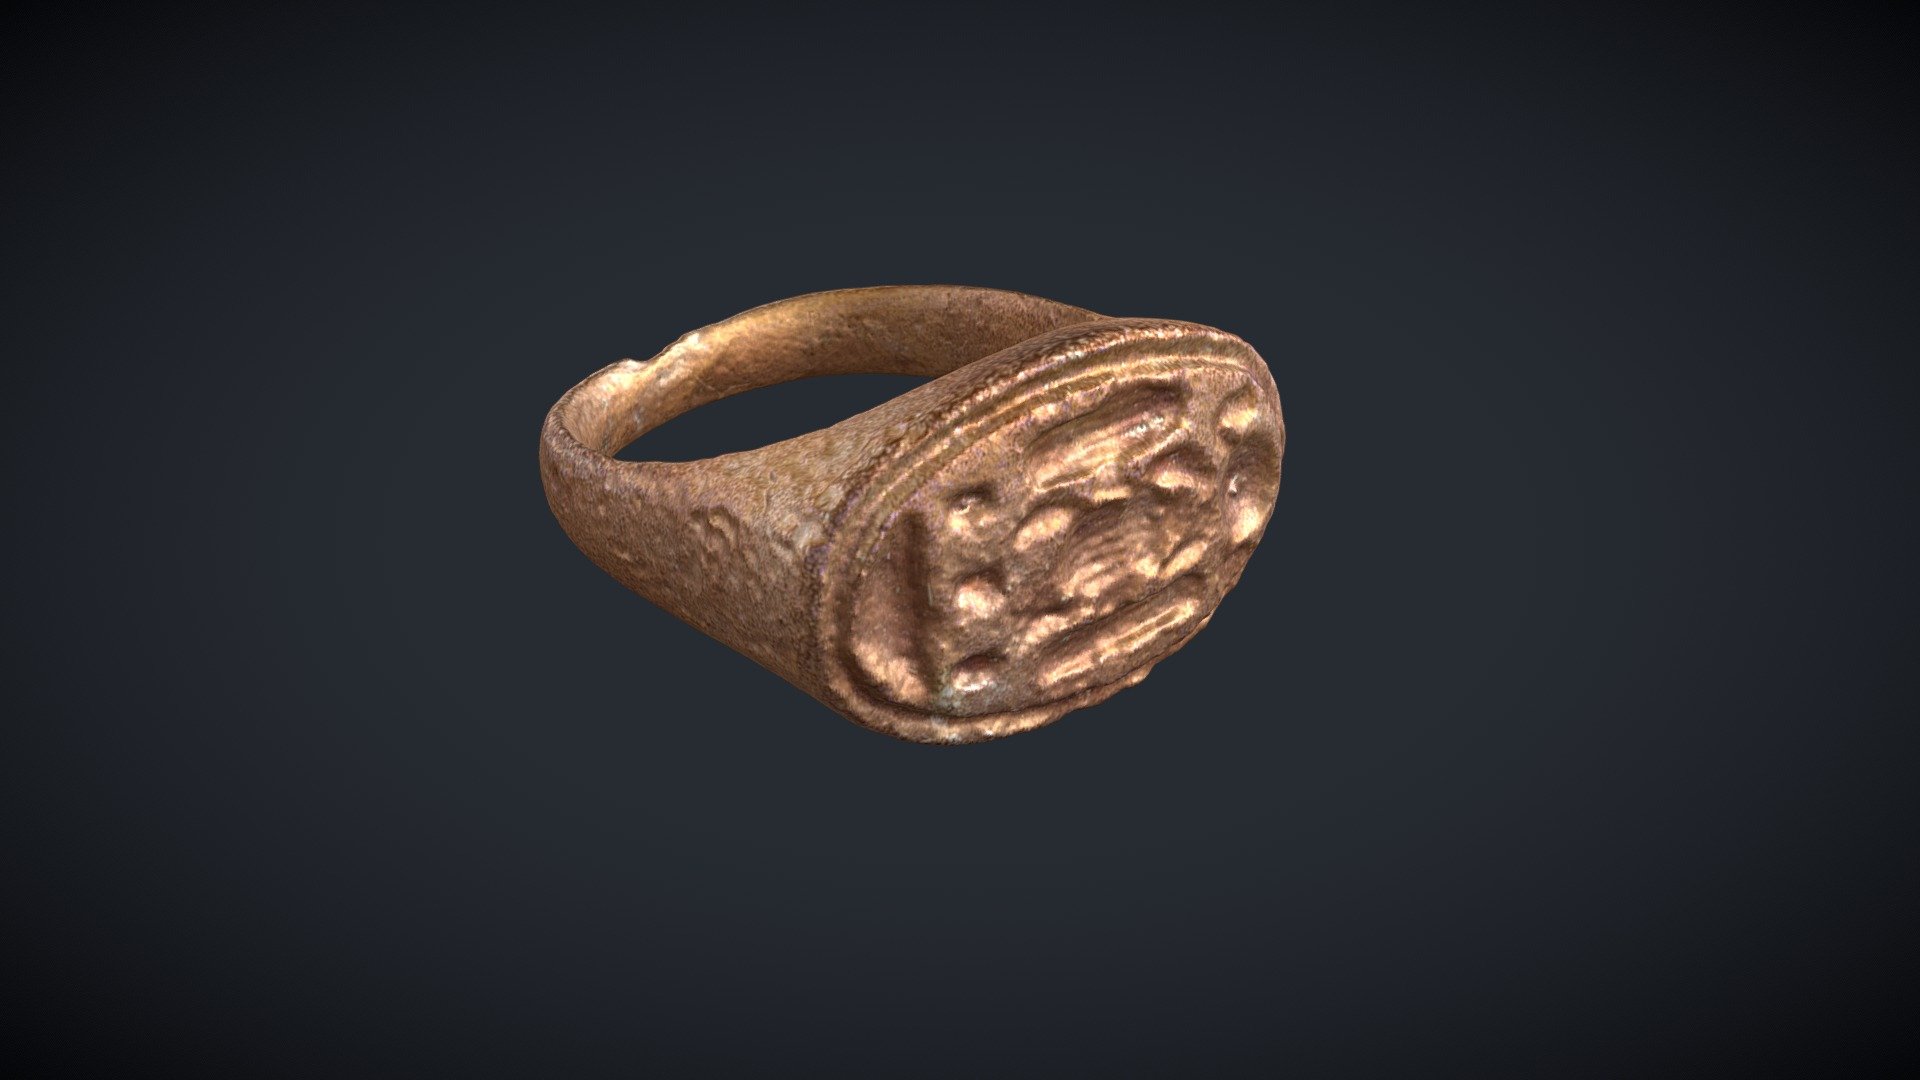 From the Petrie Museum of Egyptian Archaeology
Length 2.2cm

Ring bronze; inscribed in hieroglyphs with the throne-name of Tutankhamun (Nebkheperura), the Ra-disk with pendant uraei and the kheper-scarab winged. No provenance

Scanned by S Dey, ThinkSee3D 17/03/23 - Bronze Ring with name of Tutankhamun UC12507 - 3D model by ThinkSee3D 3d model